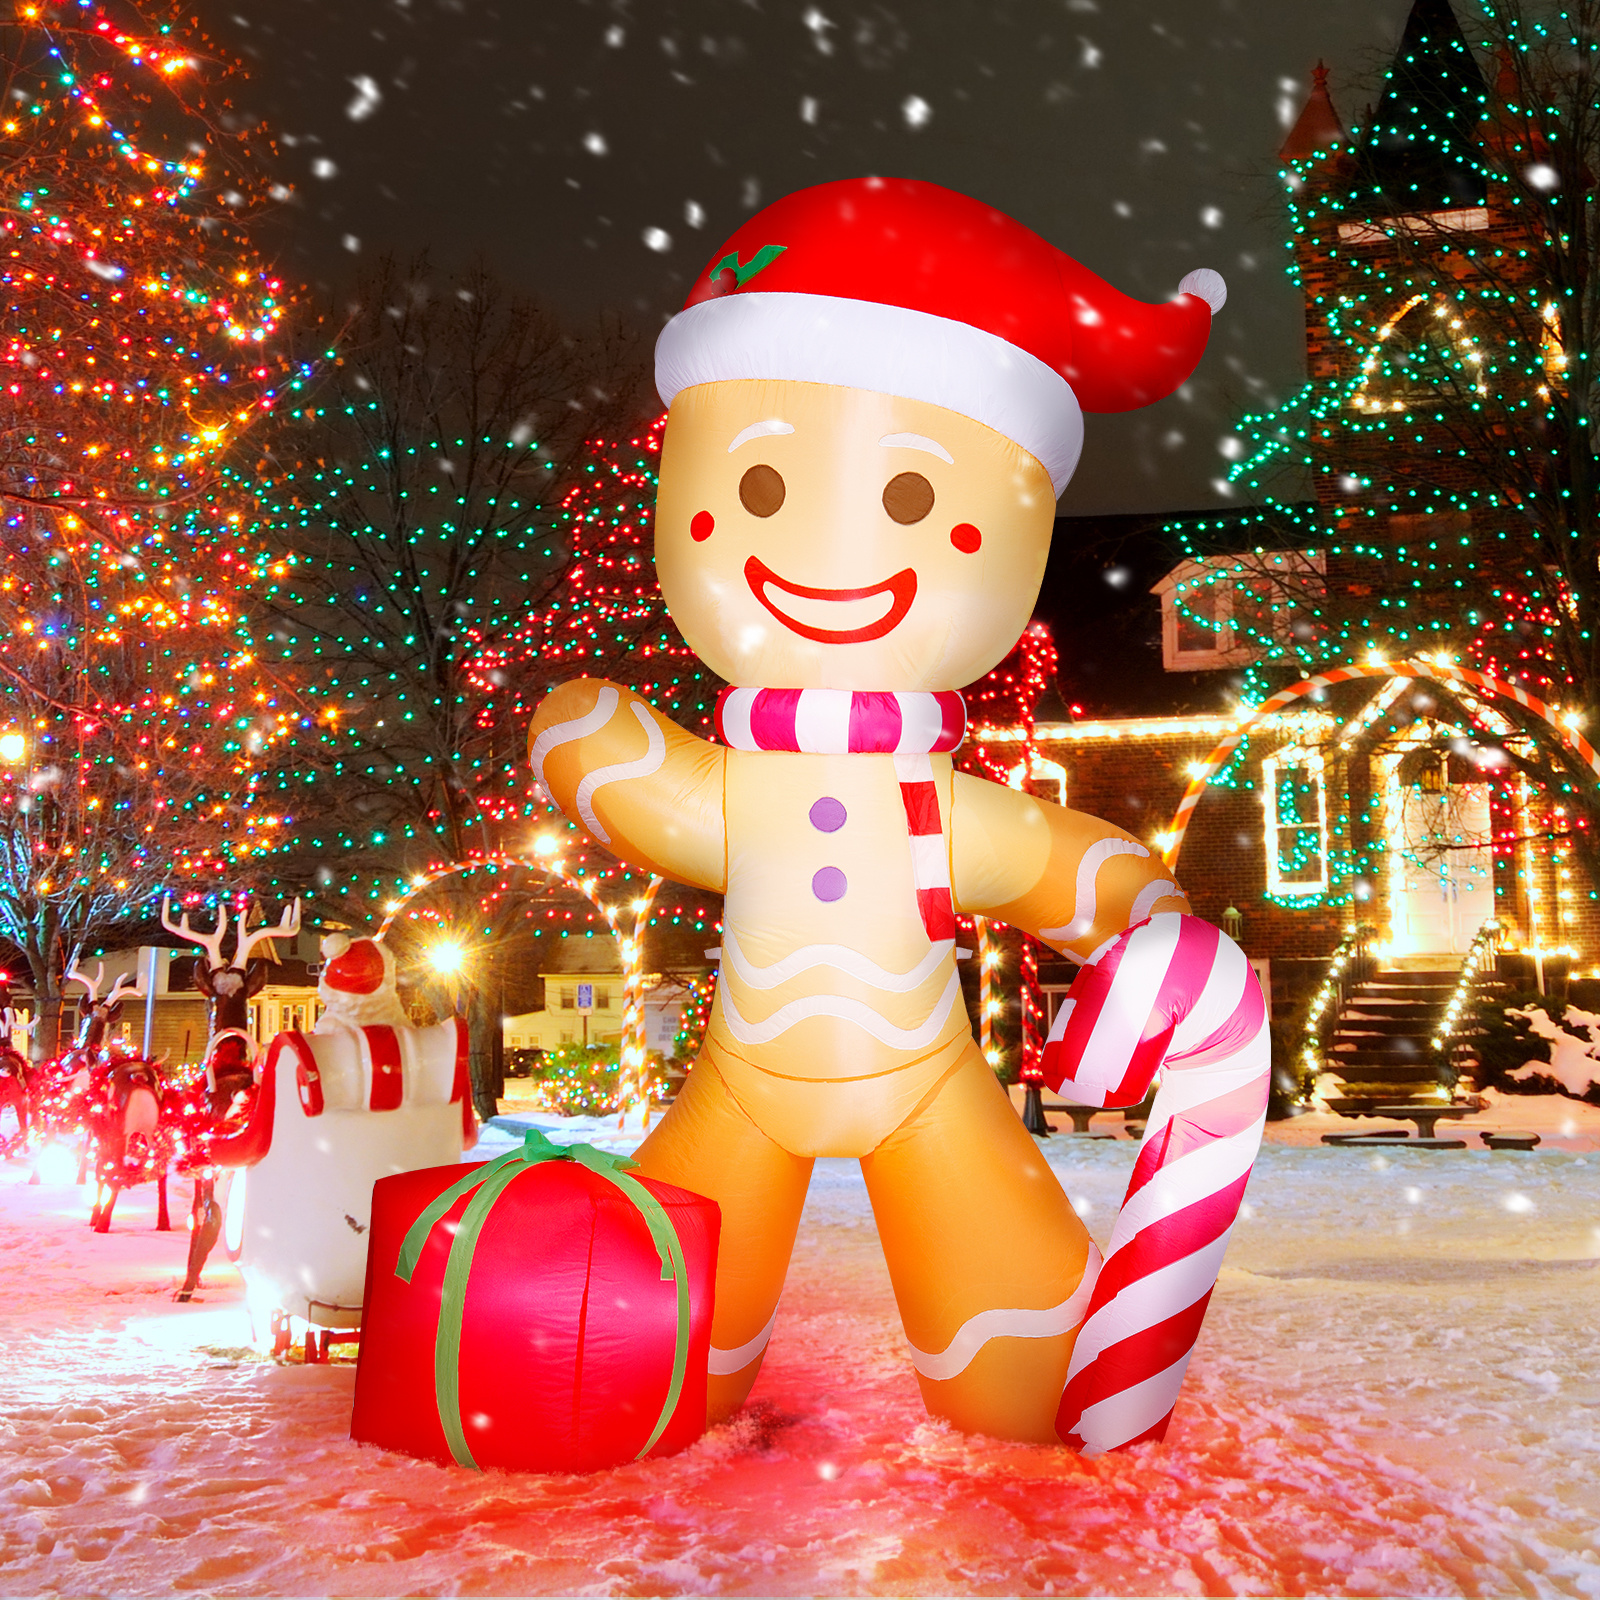 8FT Inflatable Christmas Decorations Gingerbread Man; Giant Gingerbread Decor; Xmas Inflatable Ornament Decoration with Build-in LED; Brown